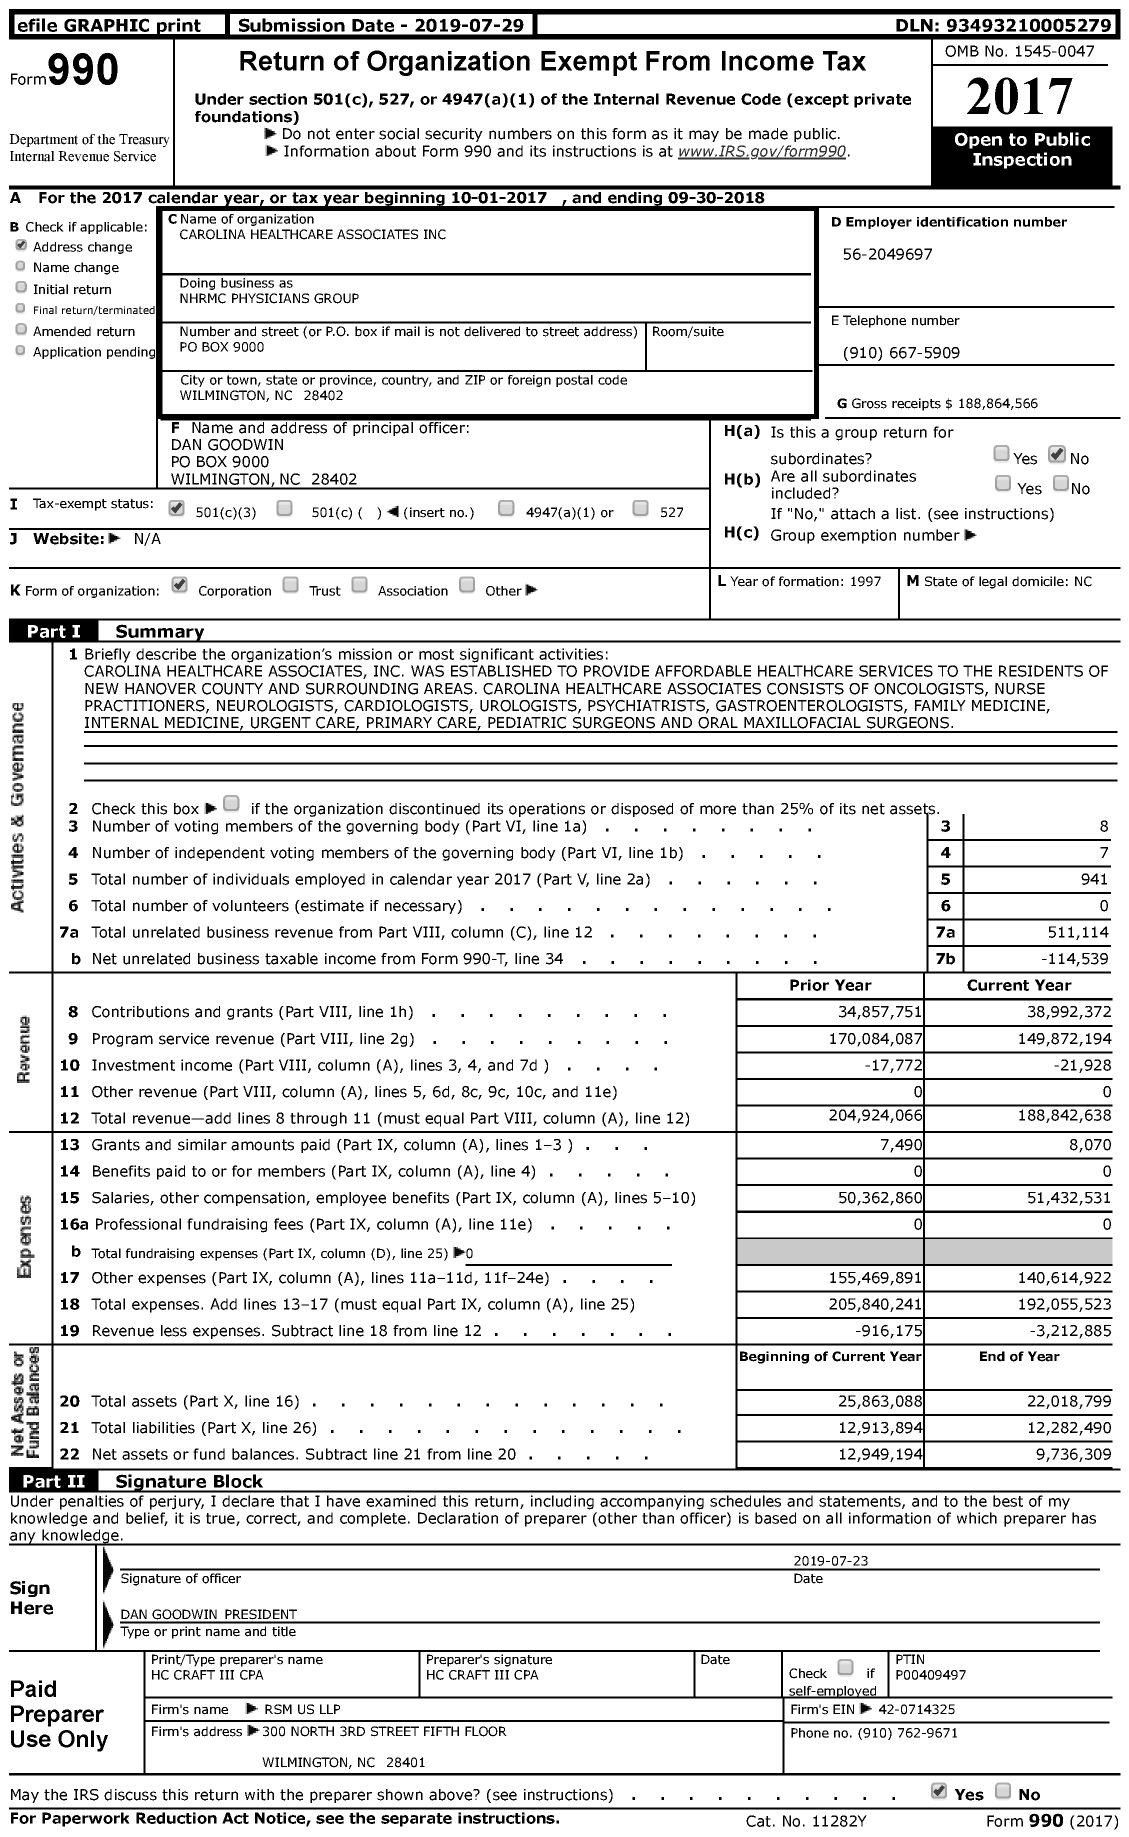 Image of first page of 2017 Form 990 for NHRMC Physicians Group